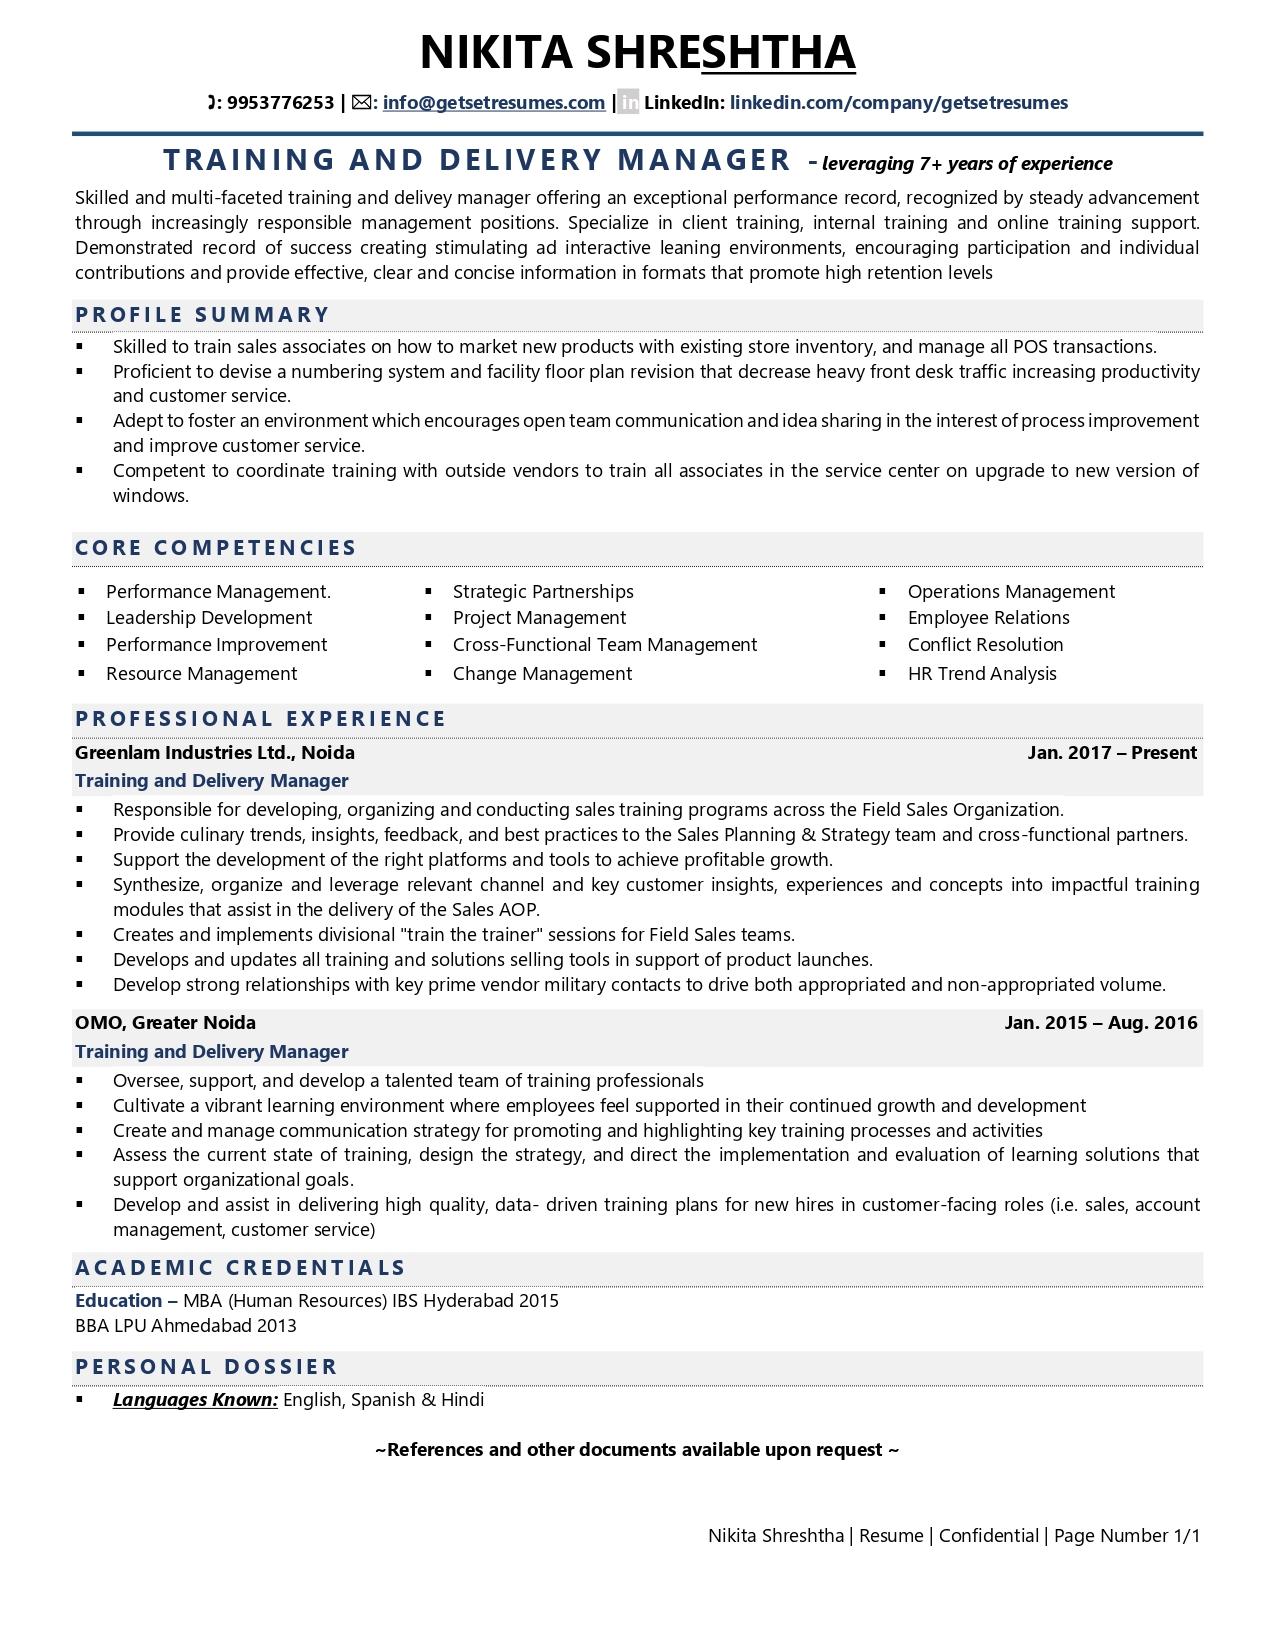 Training & Delivery Manager - Resume Example & Template